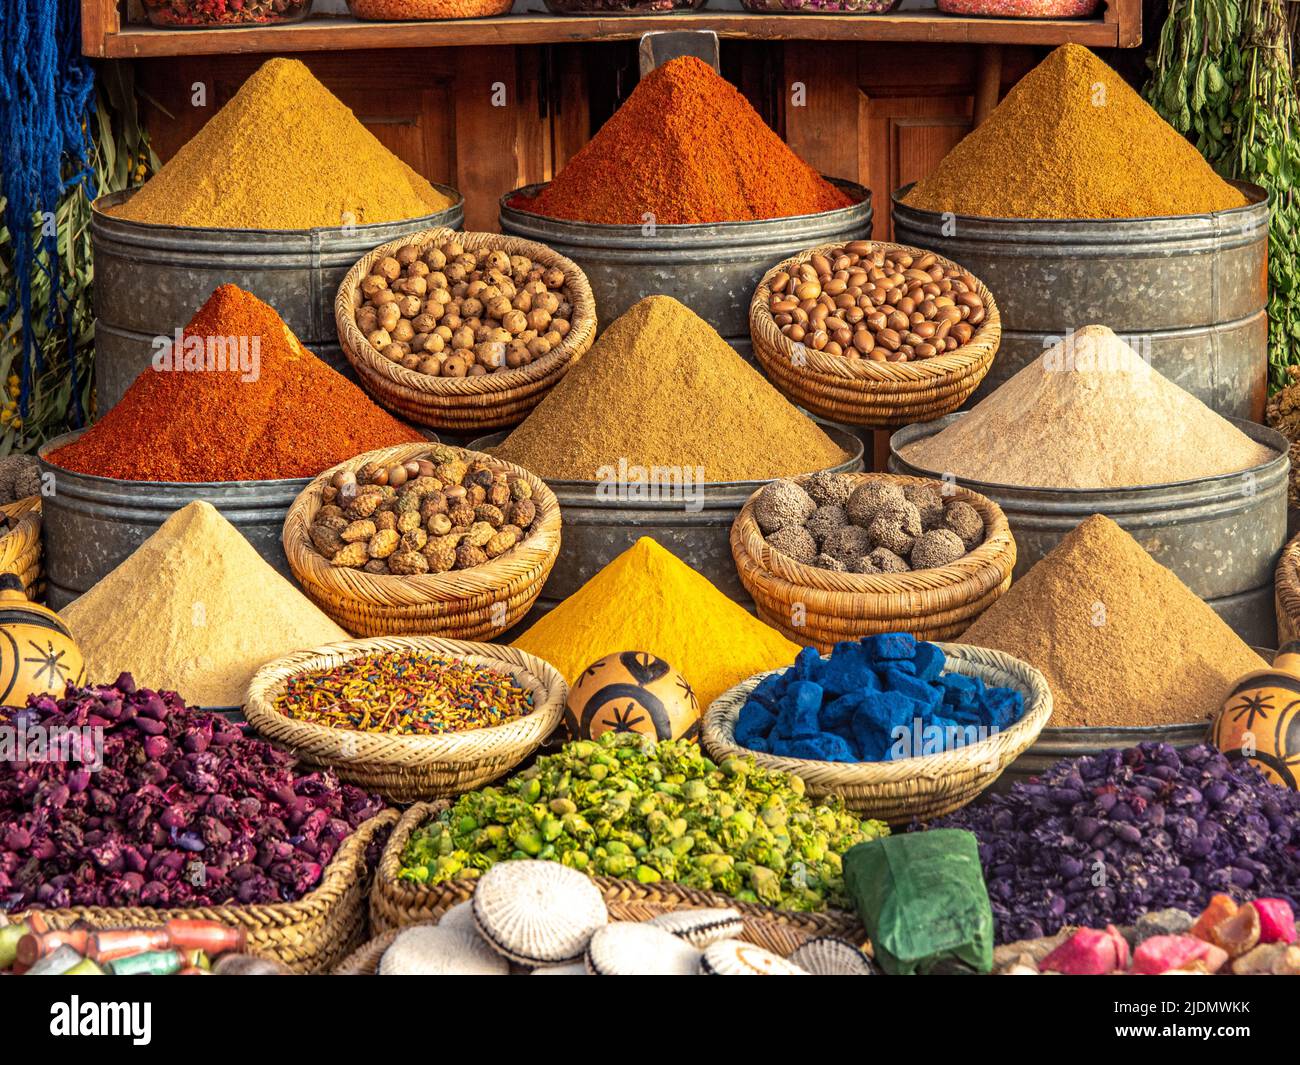 Colorful spices and dyes are found at the souk market in Marrakesh, Morocco. Stock Photo